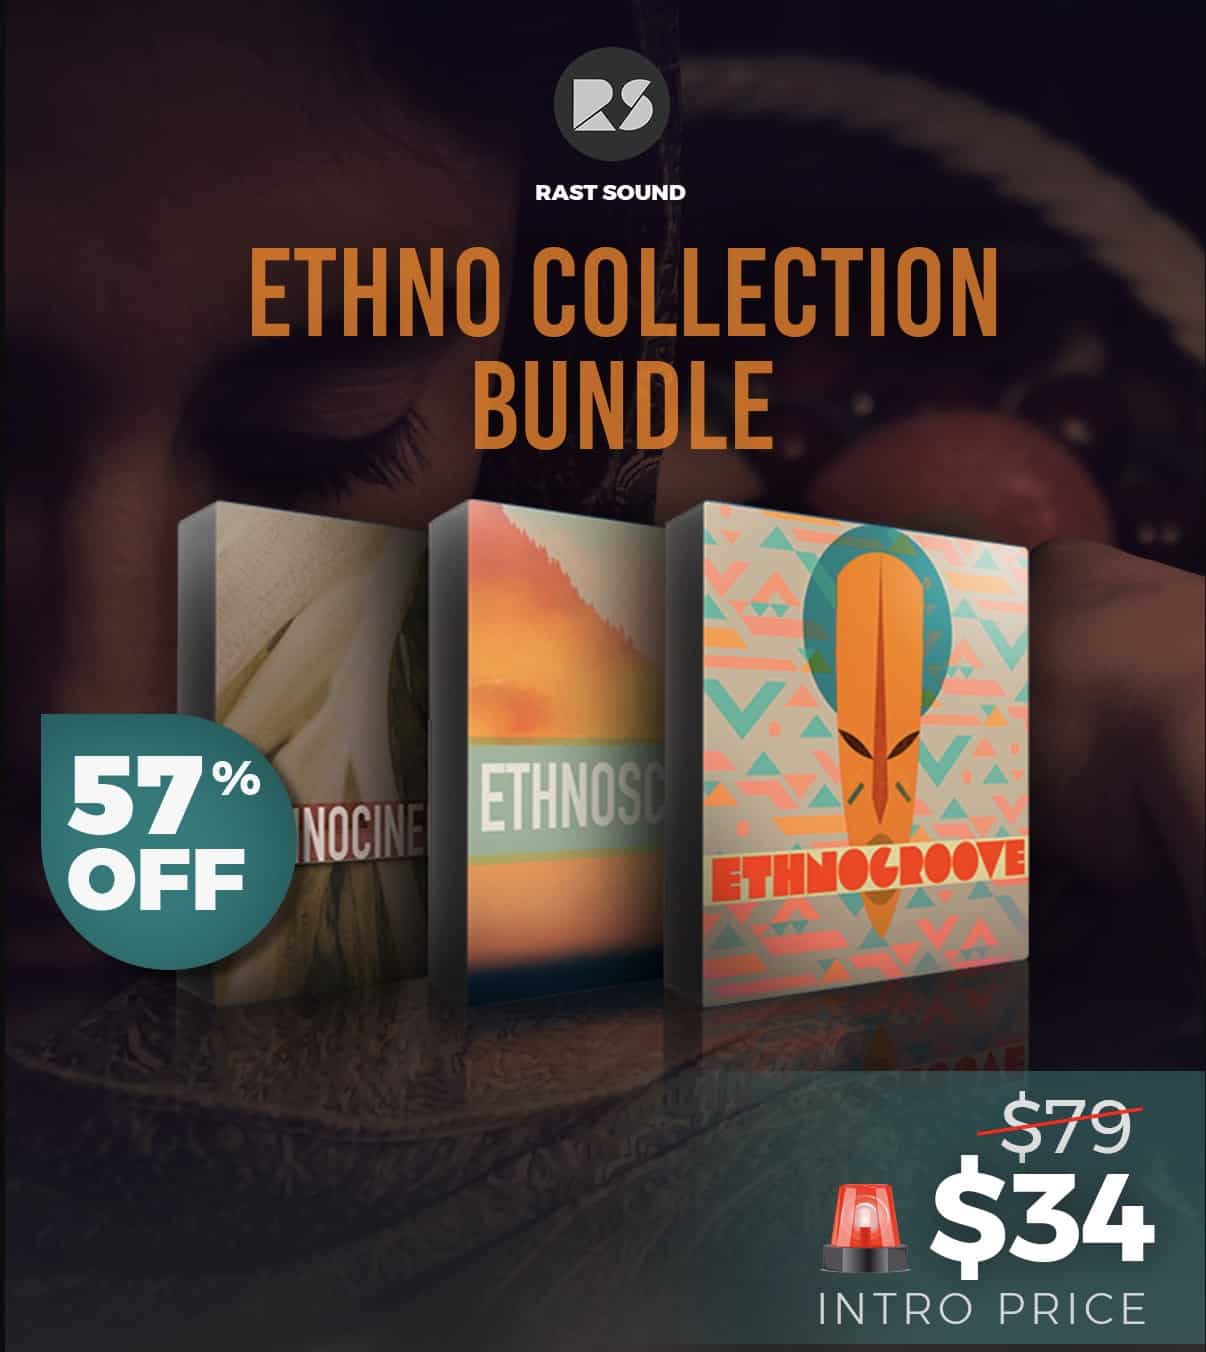 SALE on Ethno Collection by Rast Sound